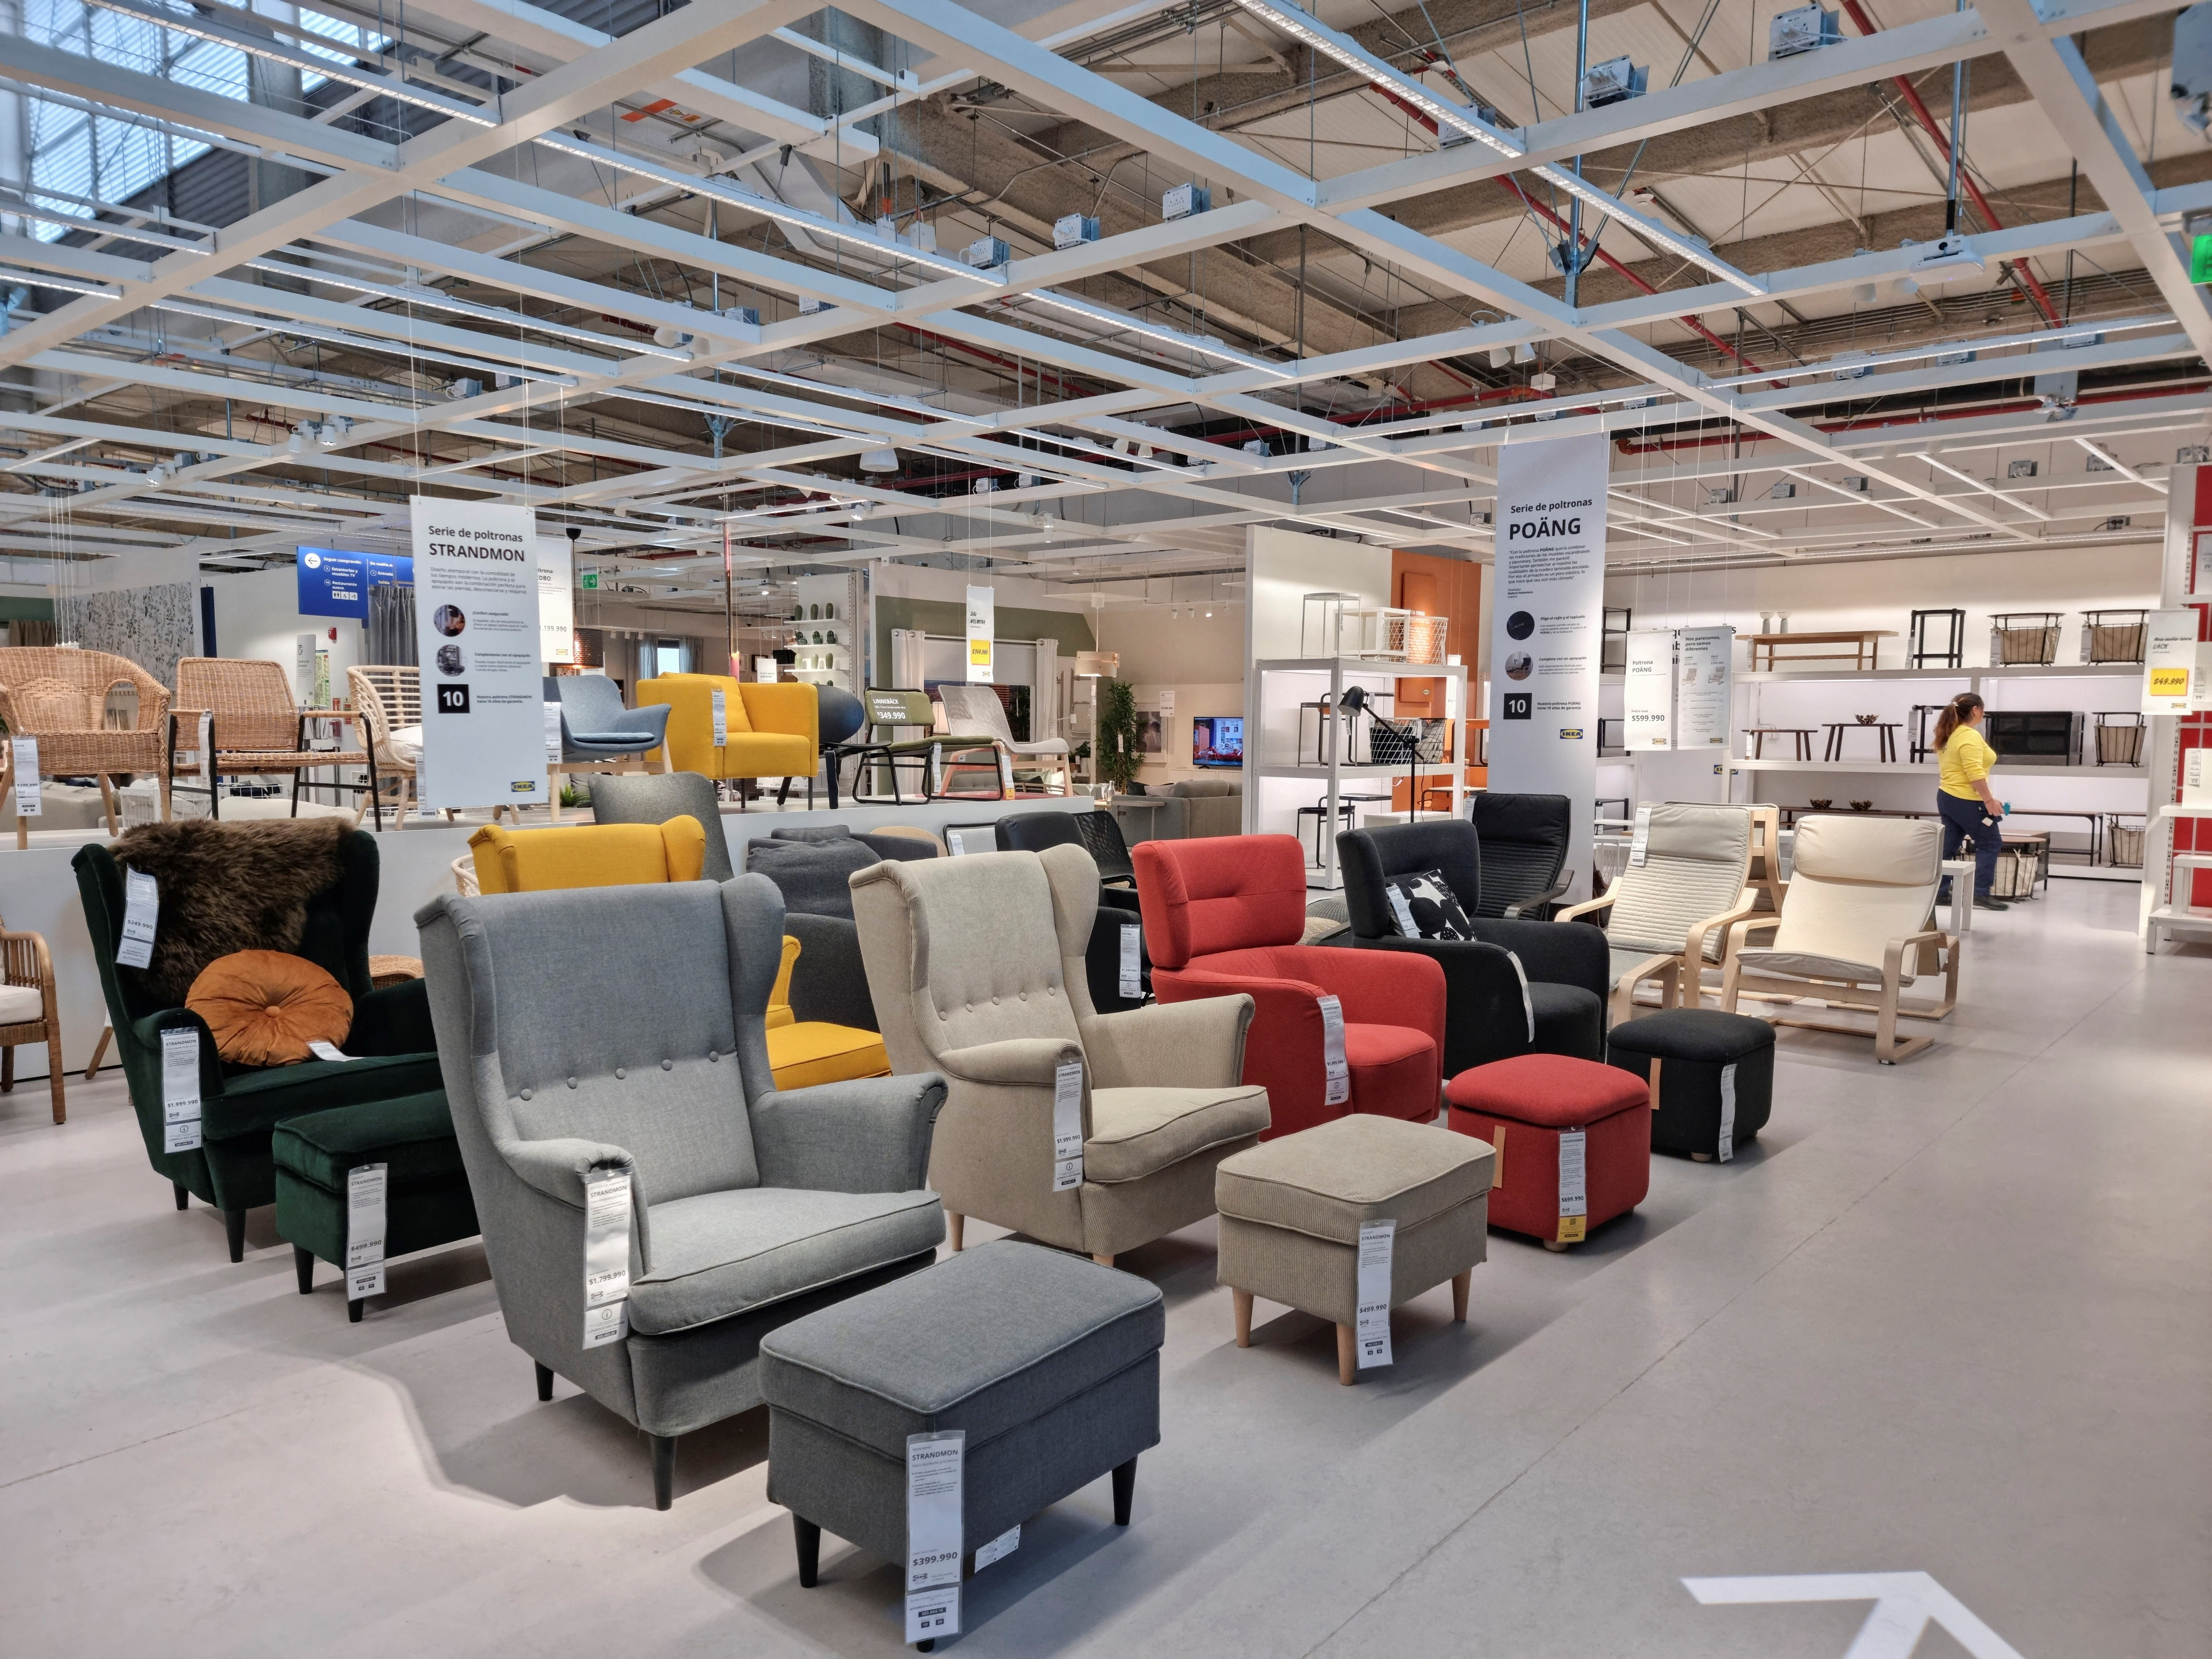 Furniture is displayed at the first IKEA store in Colombia, the largest in South America, prior to its opening to the public in Bogota